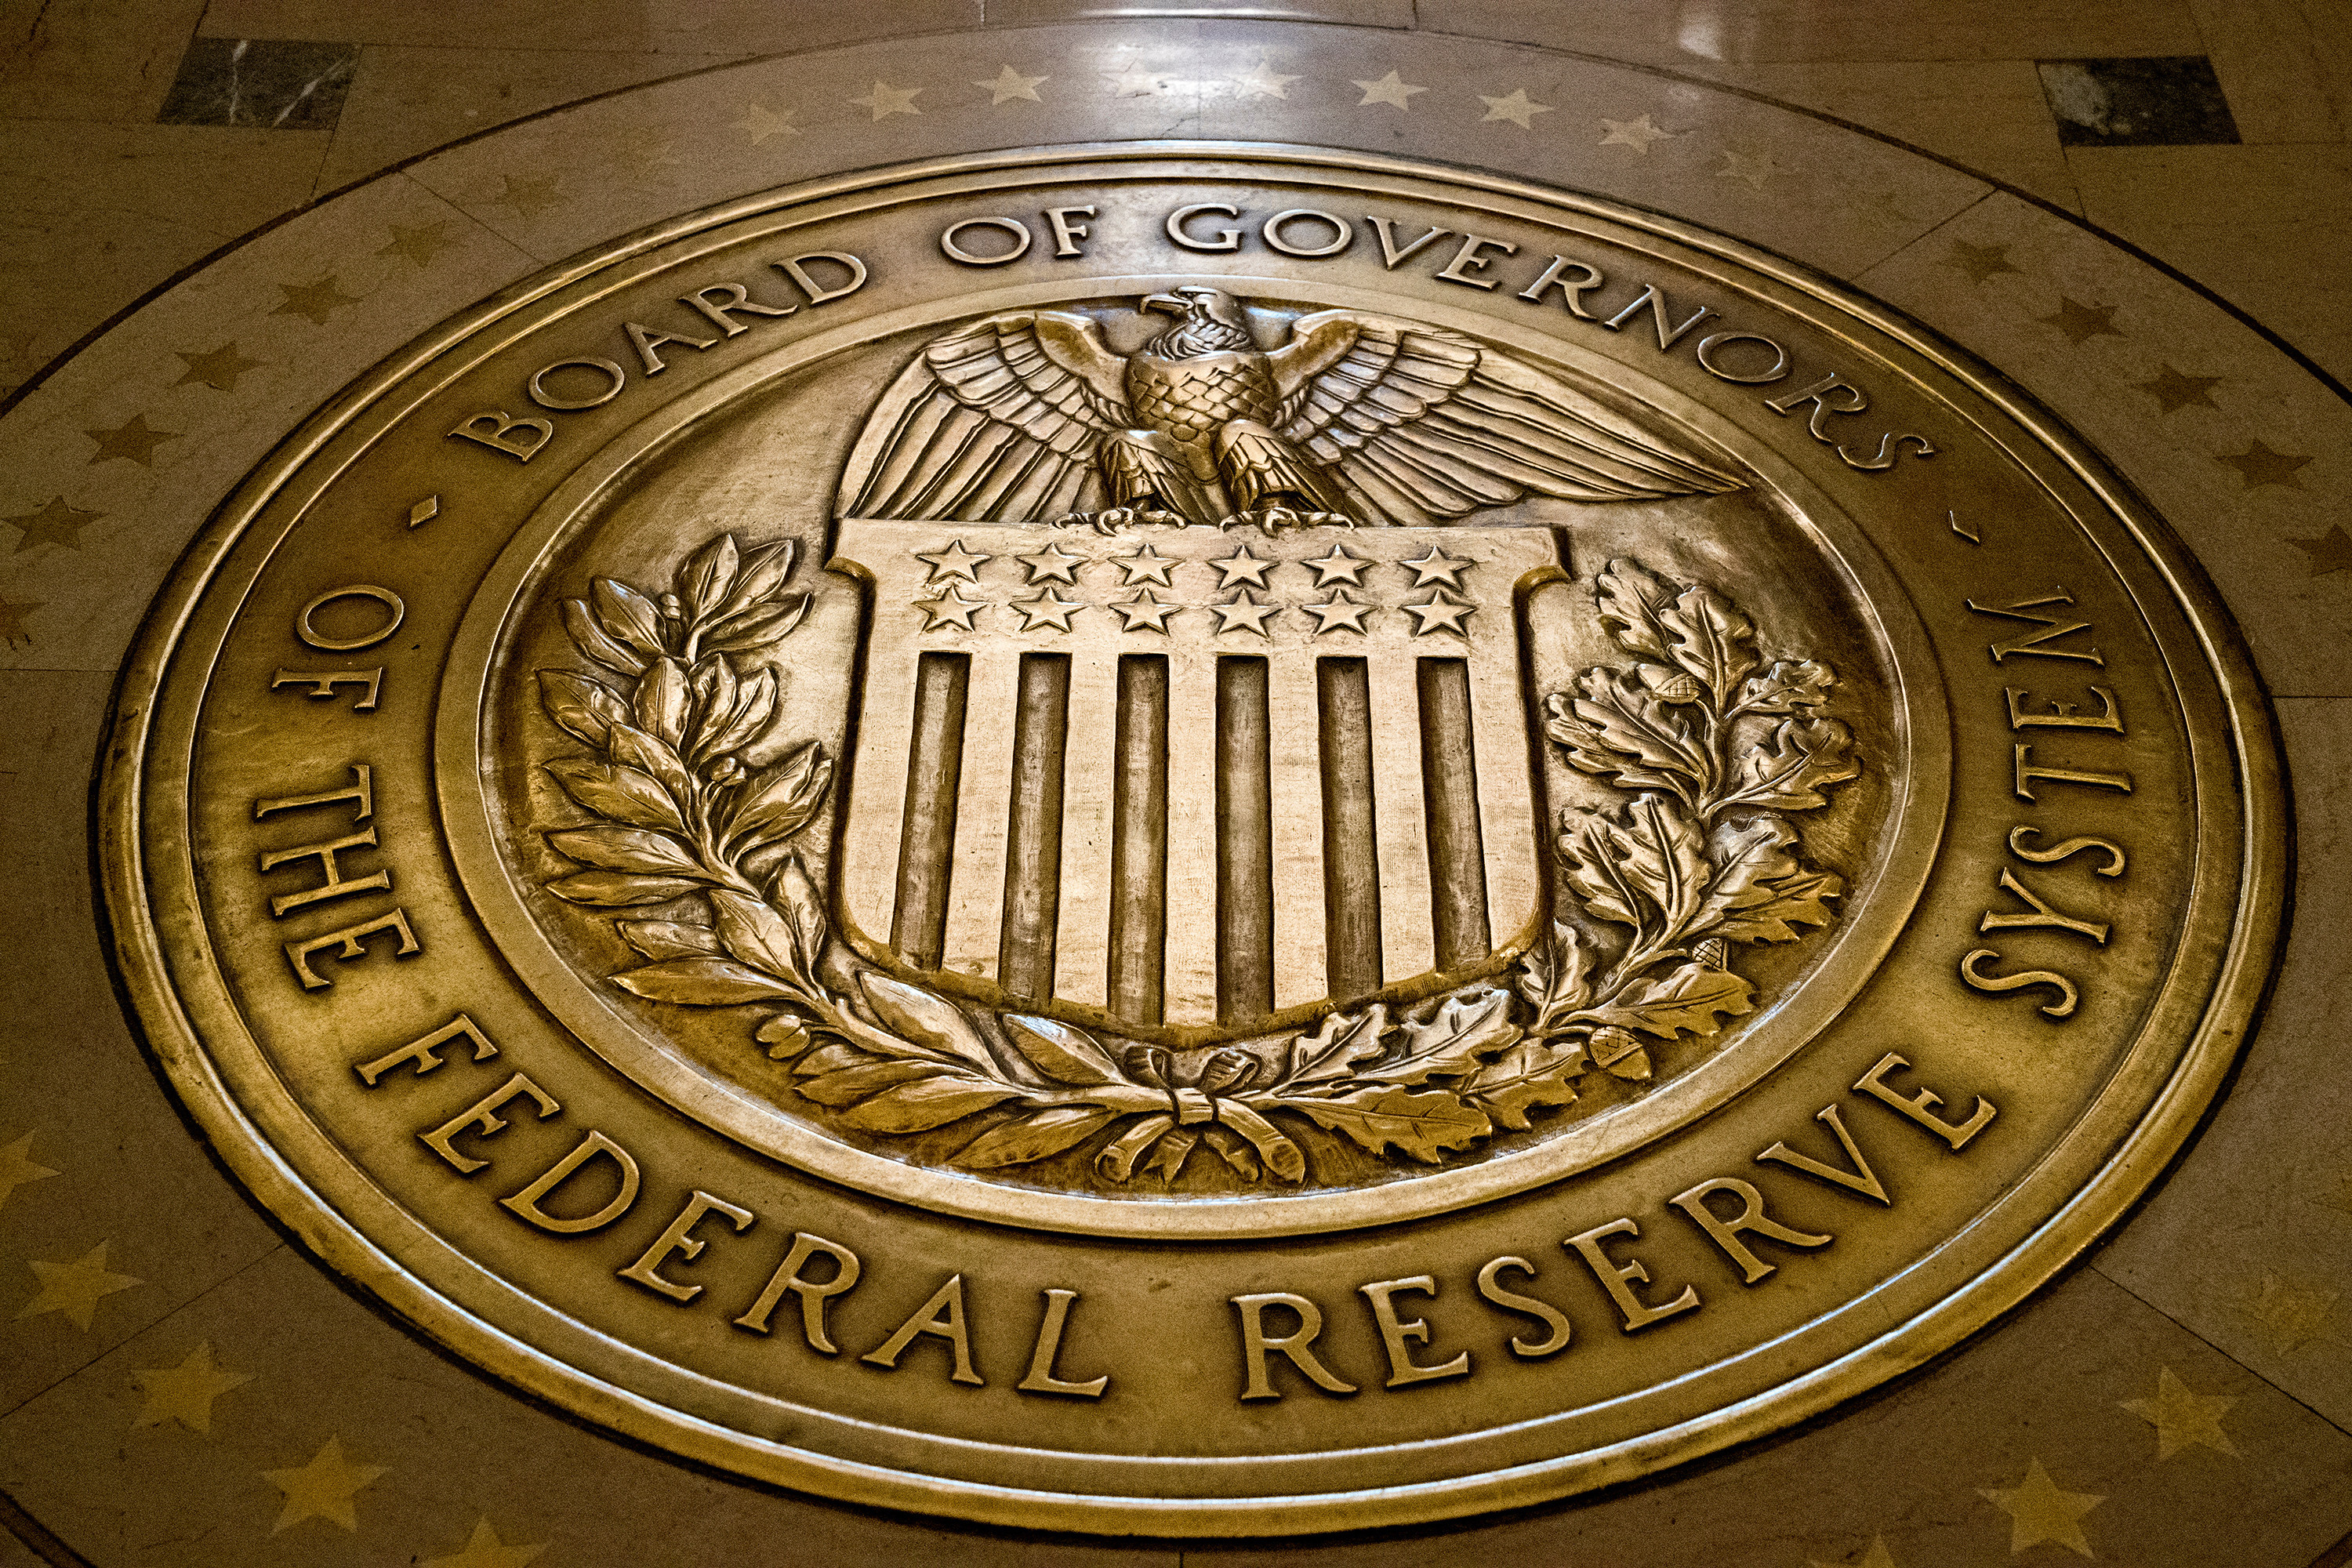 The United States’ 23 largest banks passed the Federal Reserve’s so-called ‘stress tests’ this year, a sign that the nation’s banking system remains resilient. Photo: AP Photo